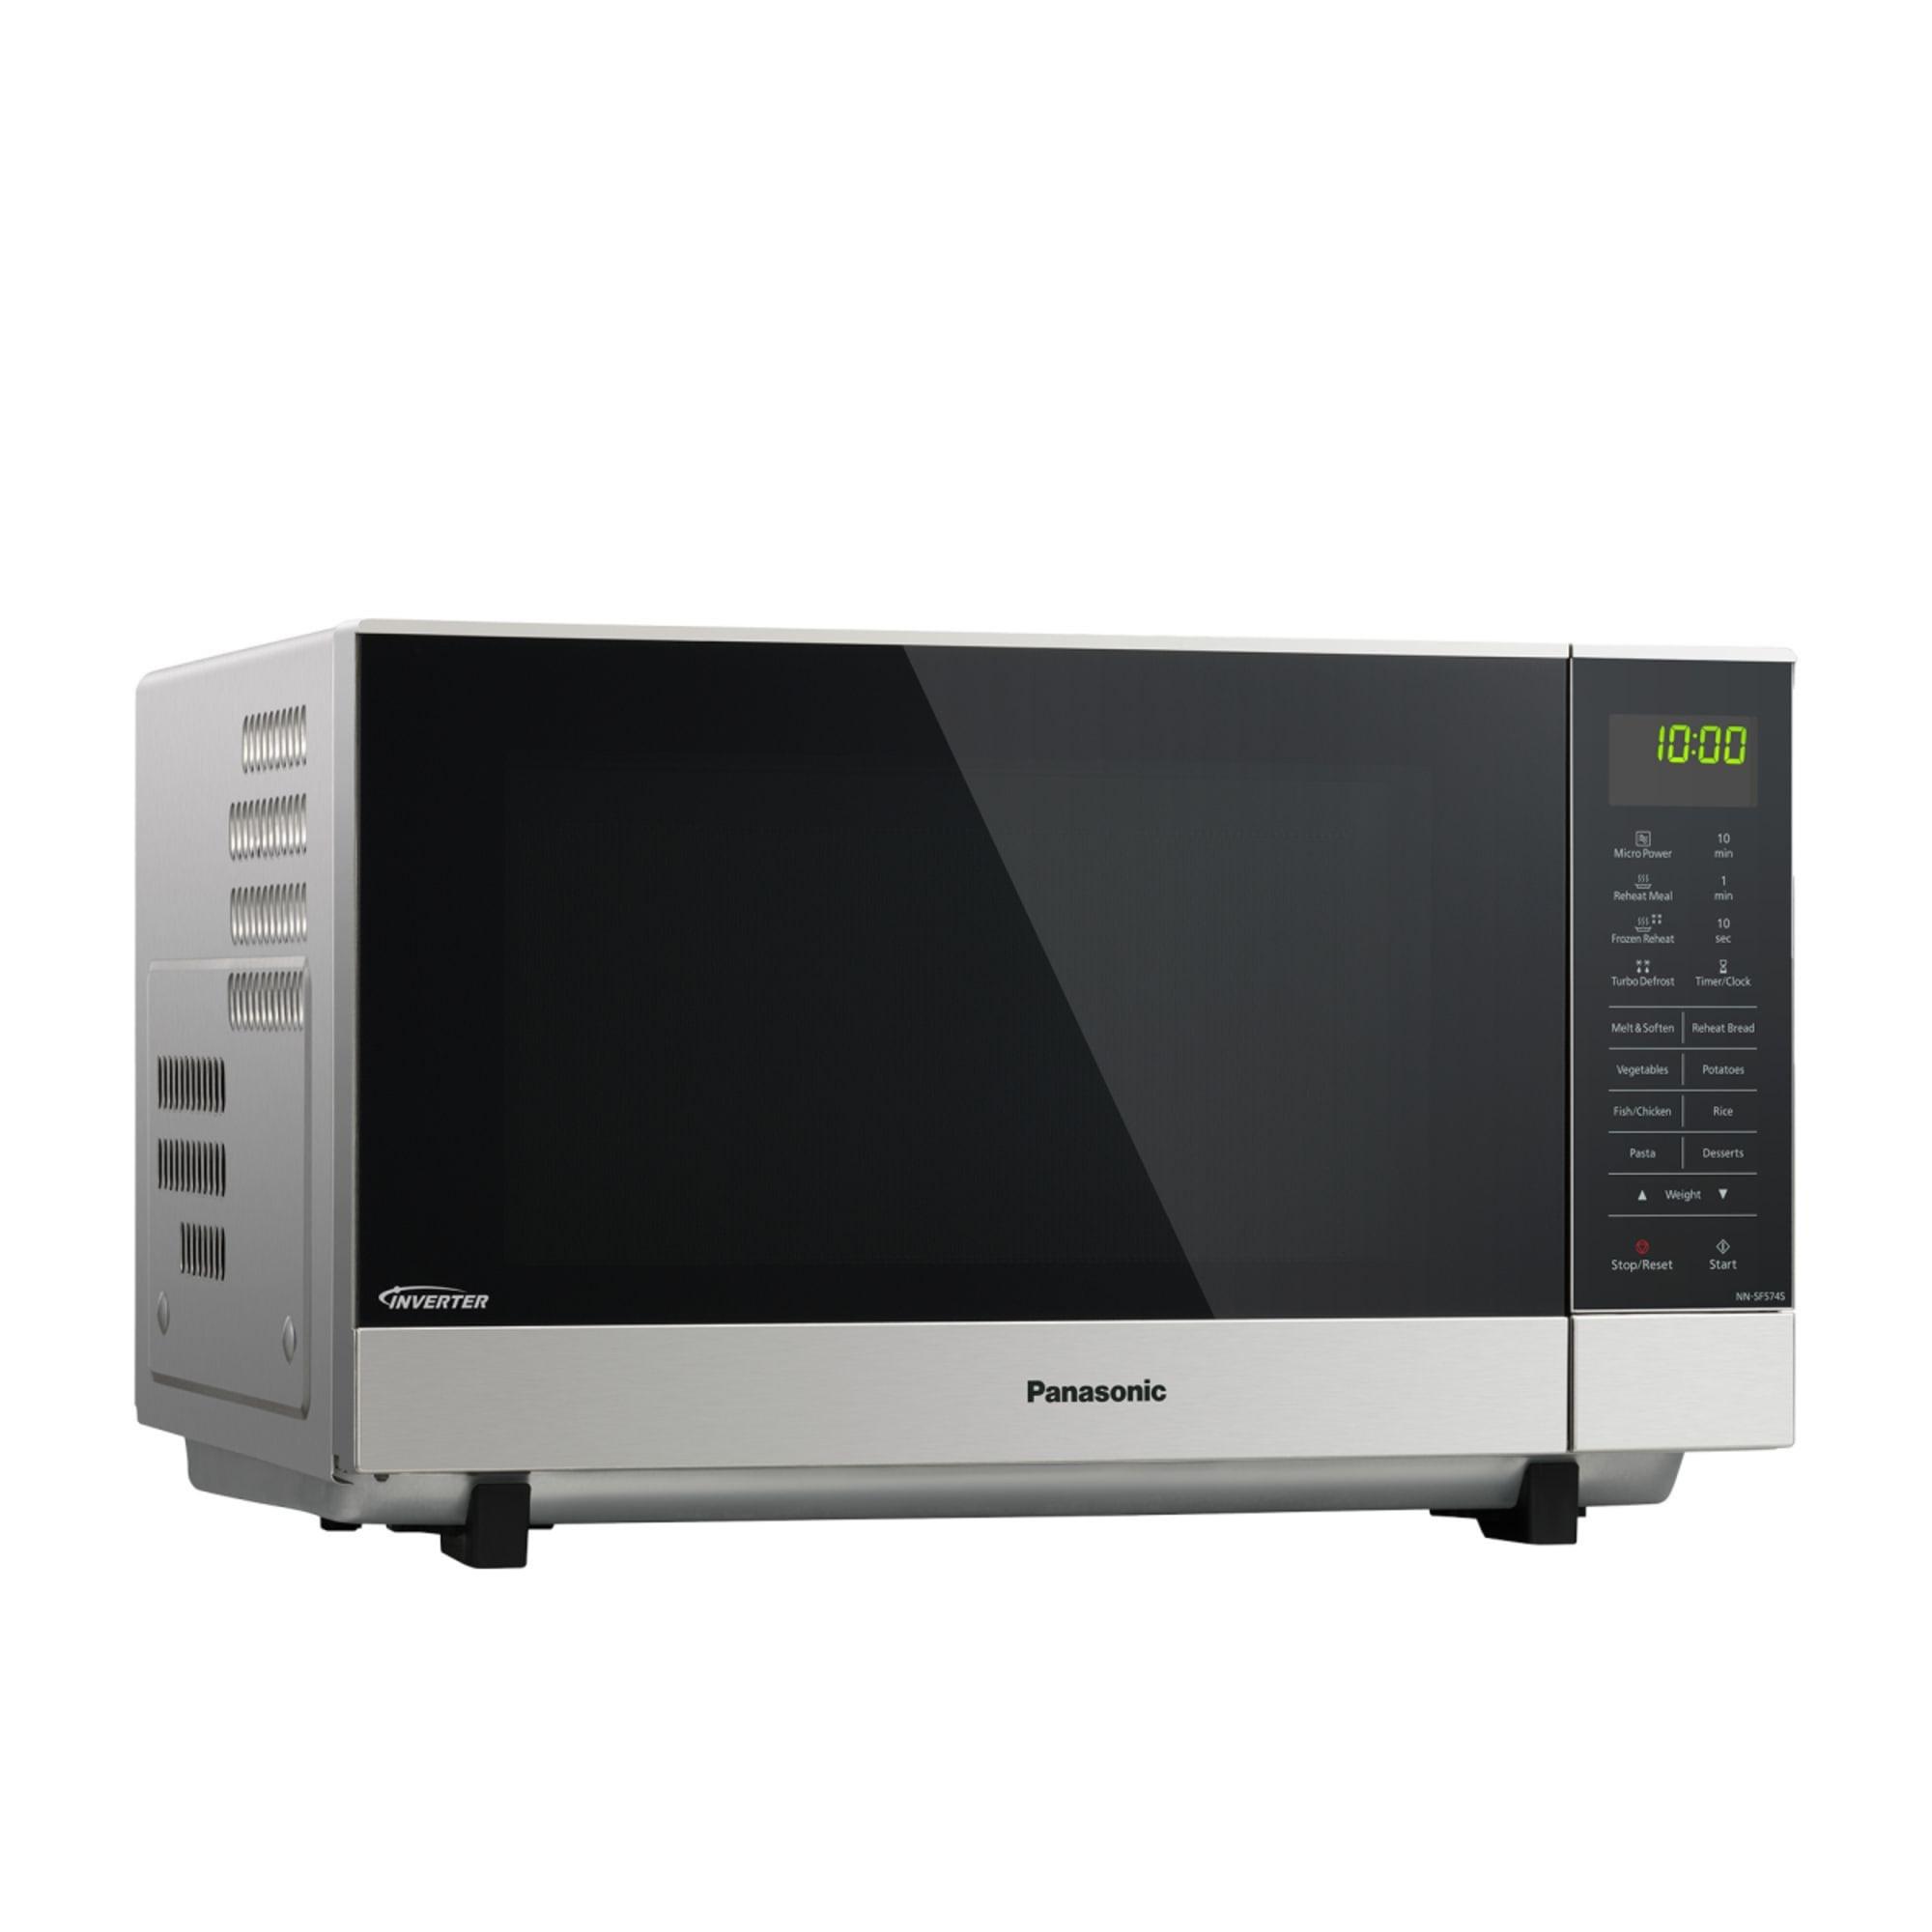 Panasonic Flatbed Microwave Oven 27L Stainless Steel Image 5